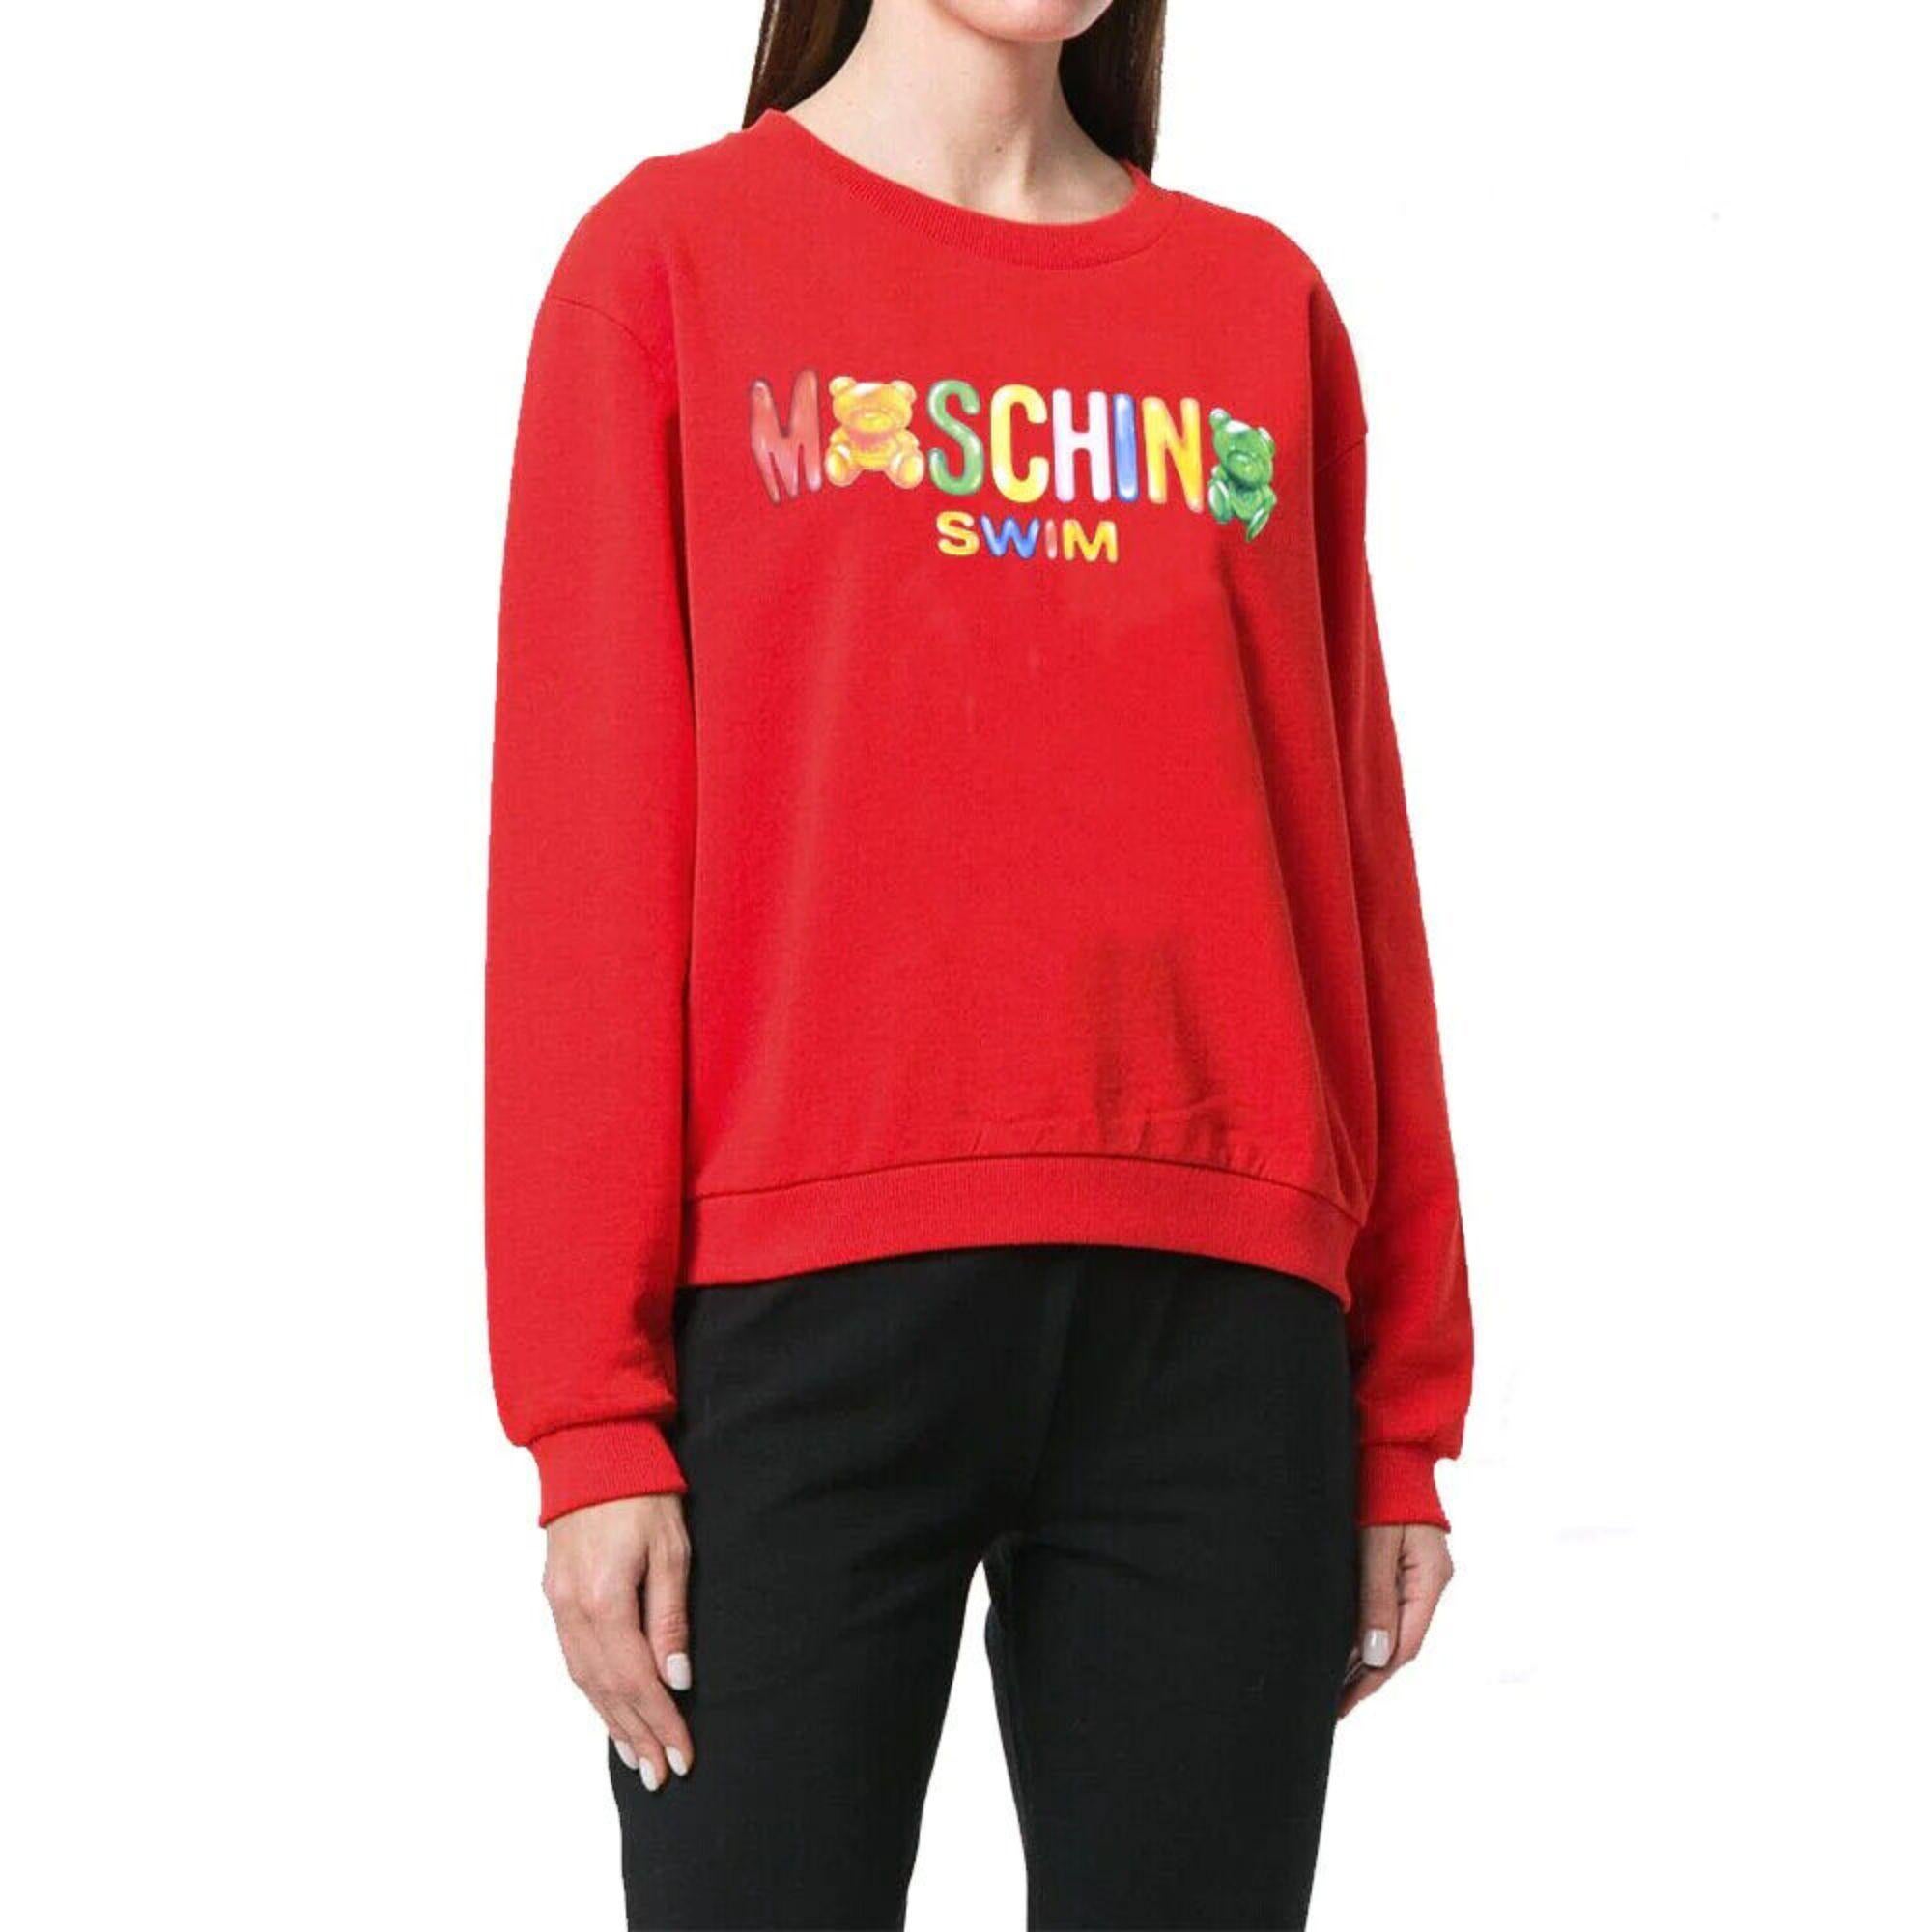 SS19 Moschino Swim Jeremy Scott Swim Jelly Gummy Teddy Bear Red Sweatshirt Candy

Additional Information:
Material: 100% Cotton
Color: Red
Size: M / US S
Style: Pullover
Pattern: Logo, Gummy Bear
Dimensions: Shoulder to shoulder 18.5